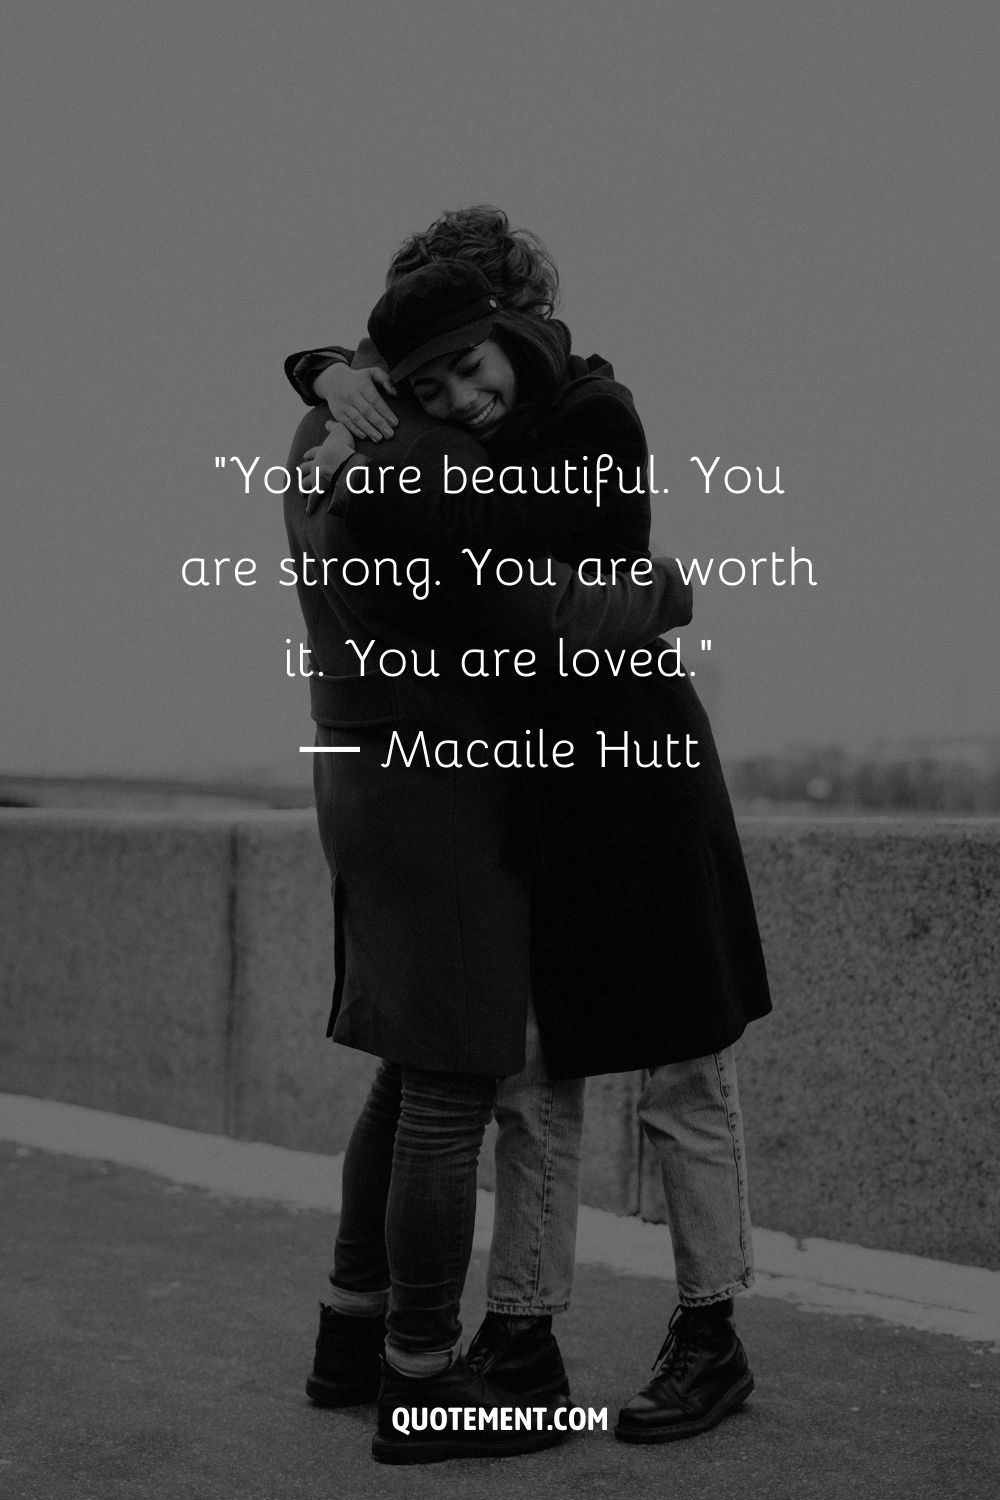 You are beautiful. You are strong. You are worth it. You are loved. ― Macaile Hutt